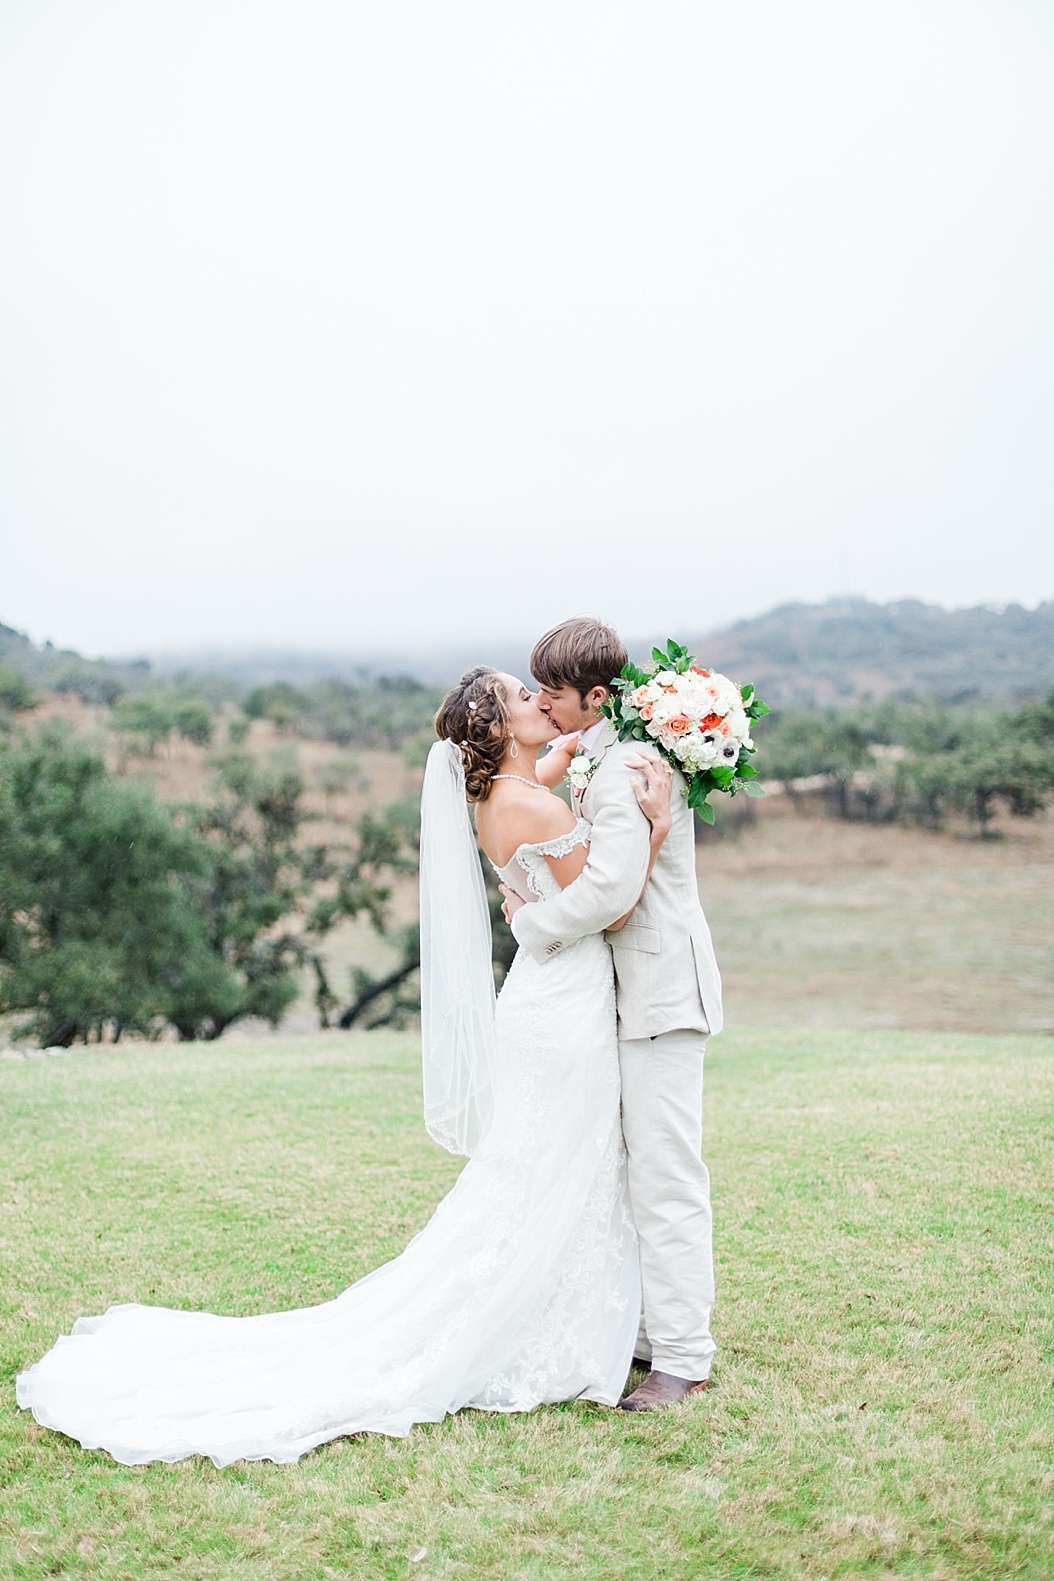 A Peach and Mint Country Chic Wedding at Happy H Ranch by Allison Jeffers Wedding Photography. Comfort Wedding Photographer 0079